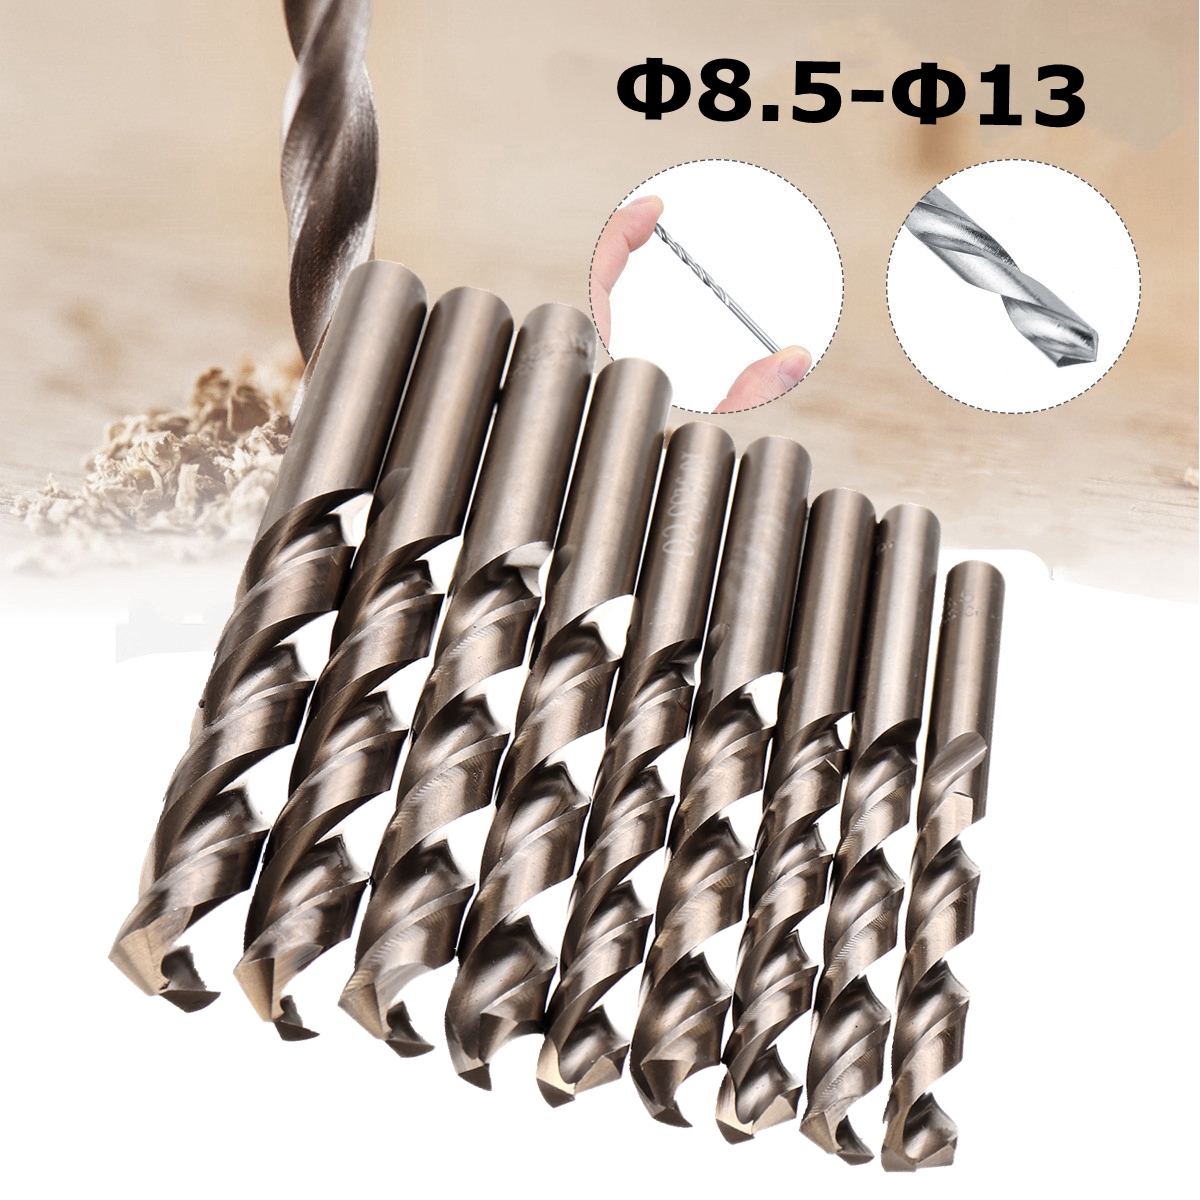 Drilling-Machines-Straigth-Shank-Wood-Tool-Auger-Twsist-Drill-Bit-Phi85-Phi13-1771356-2